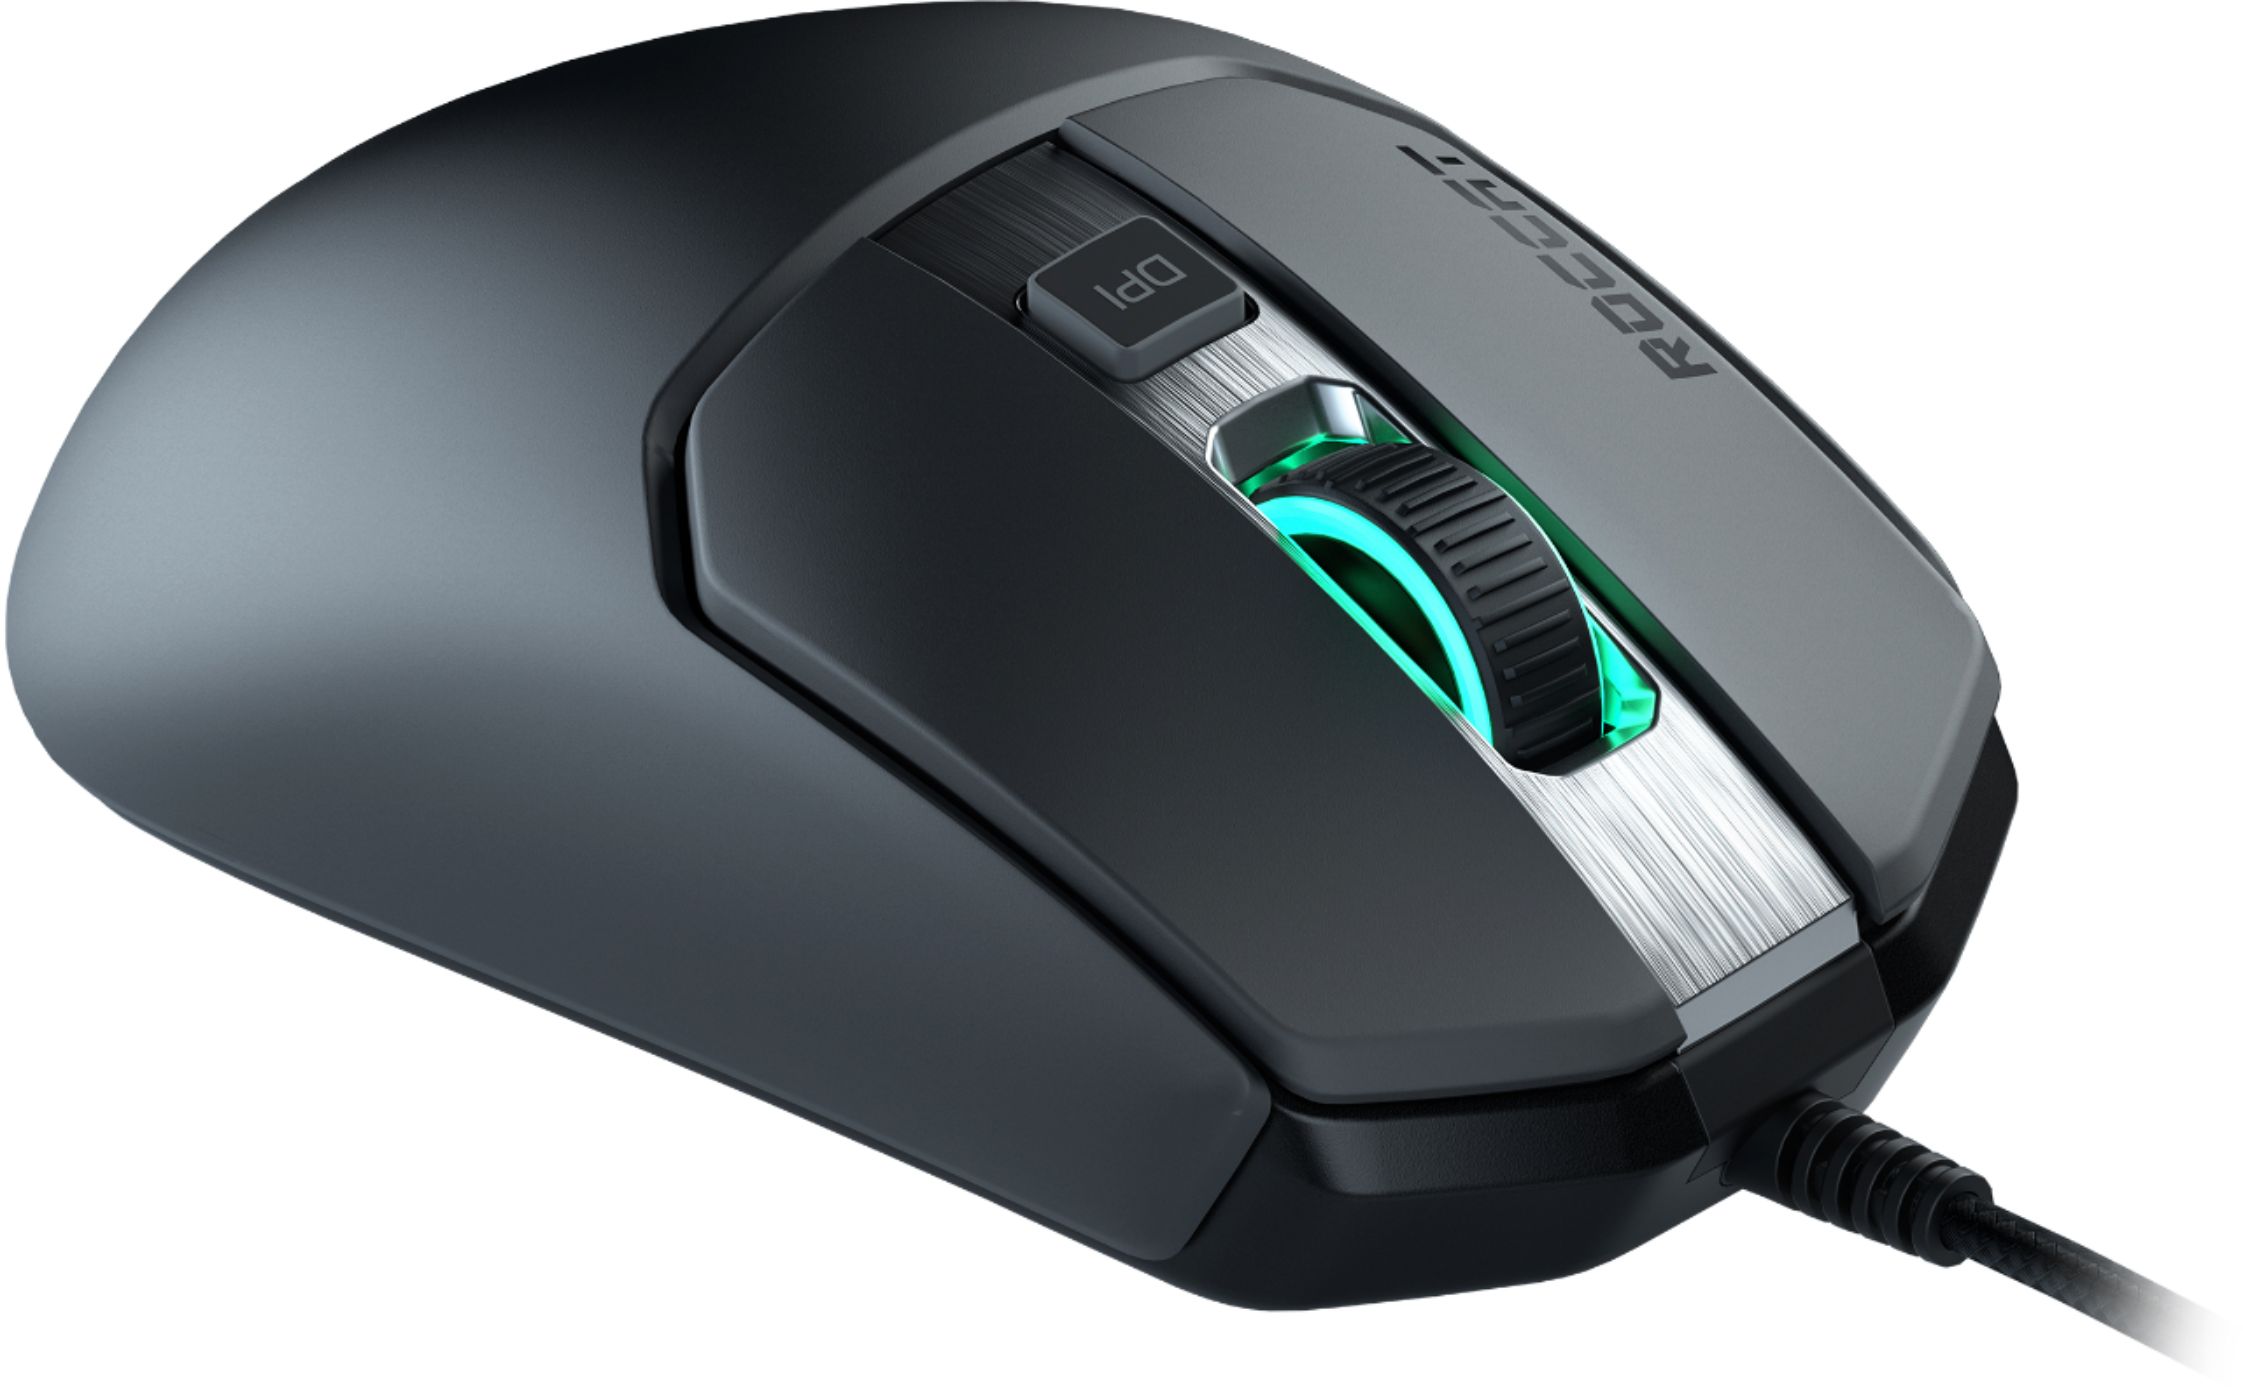 Any interesting mouse only games? : r/Gaming4Gamers